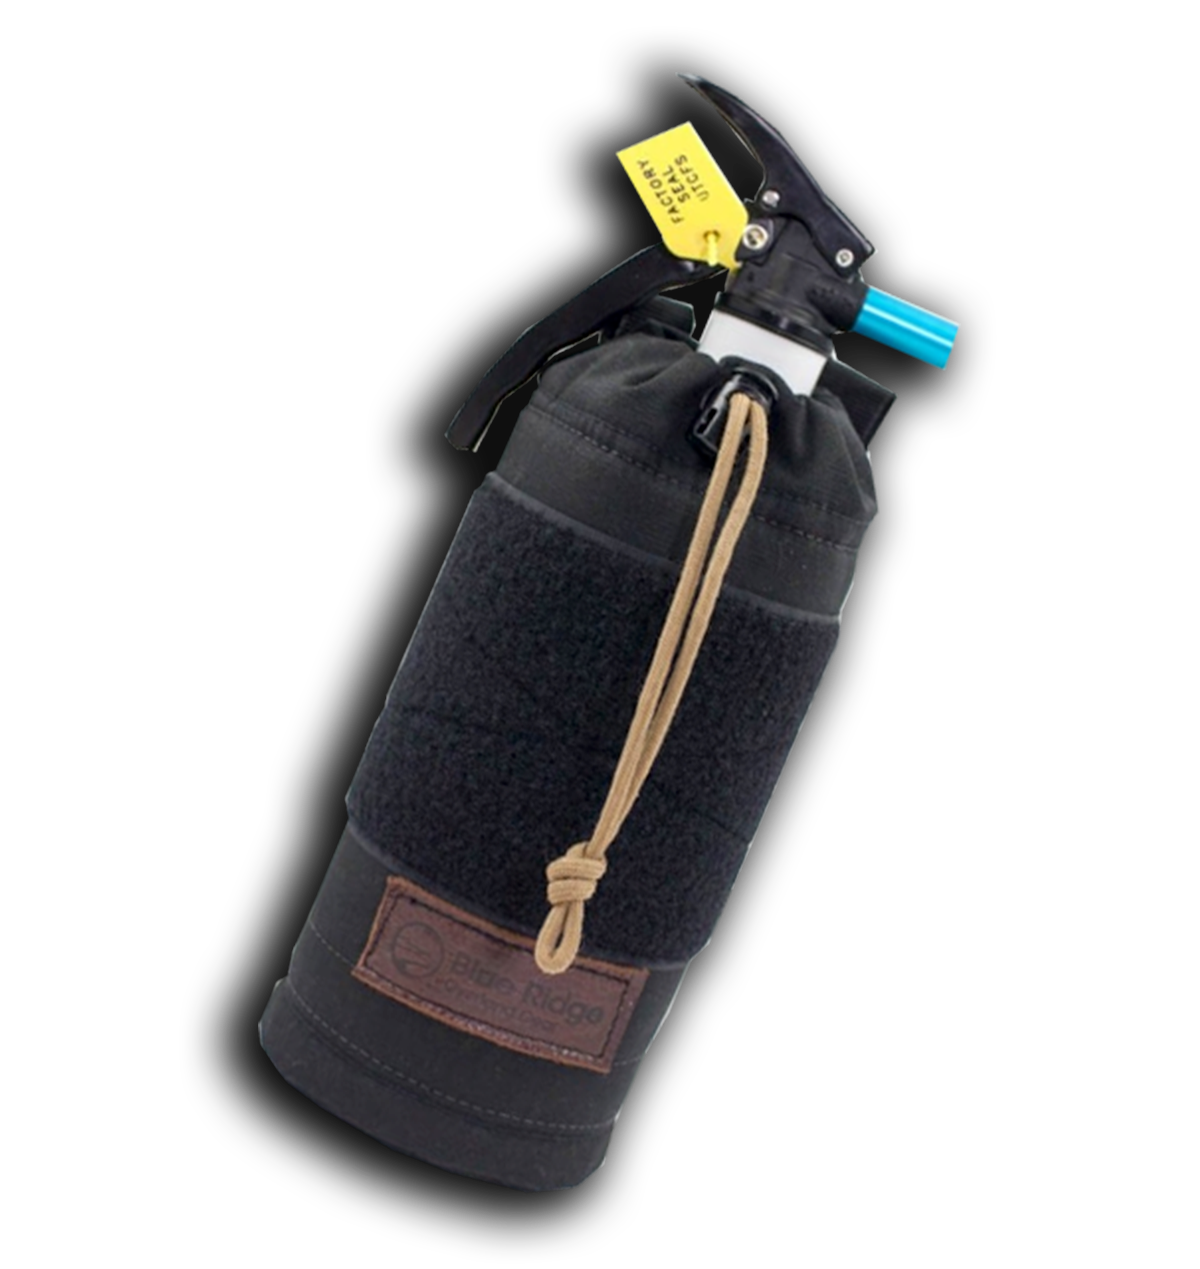 Fire Extinguisher MOLLE Pouch - Medium by Blue Ridge Overland Gear